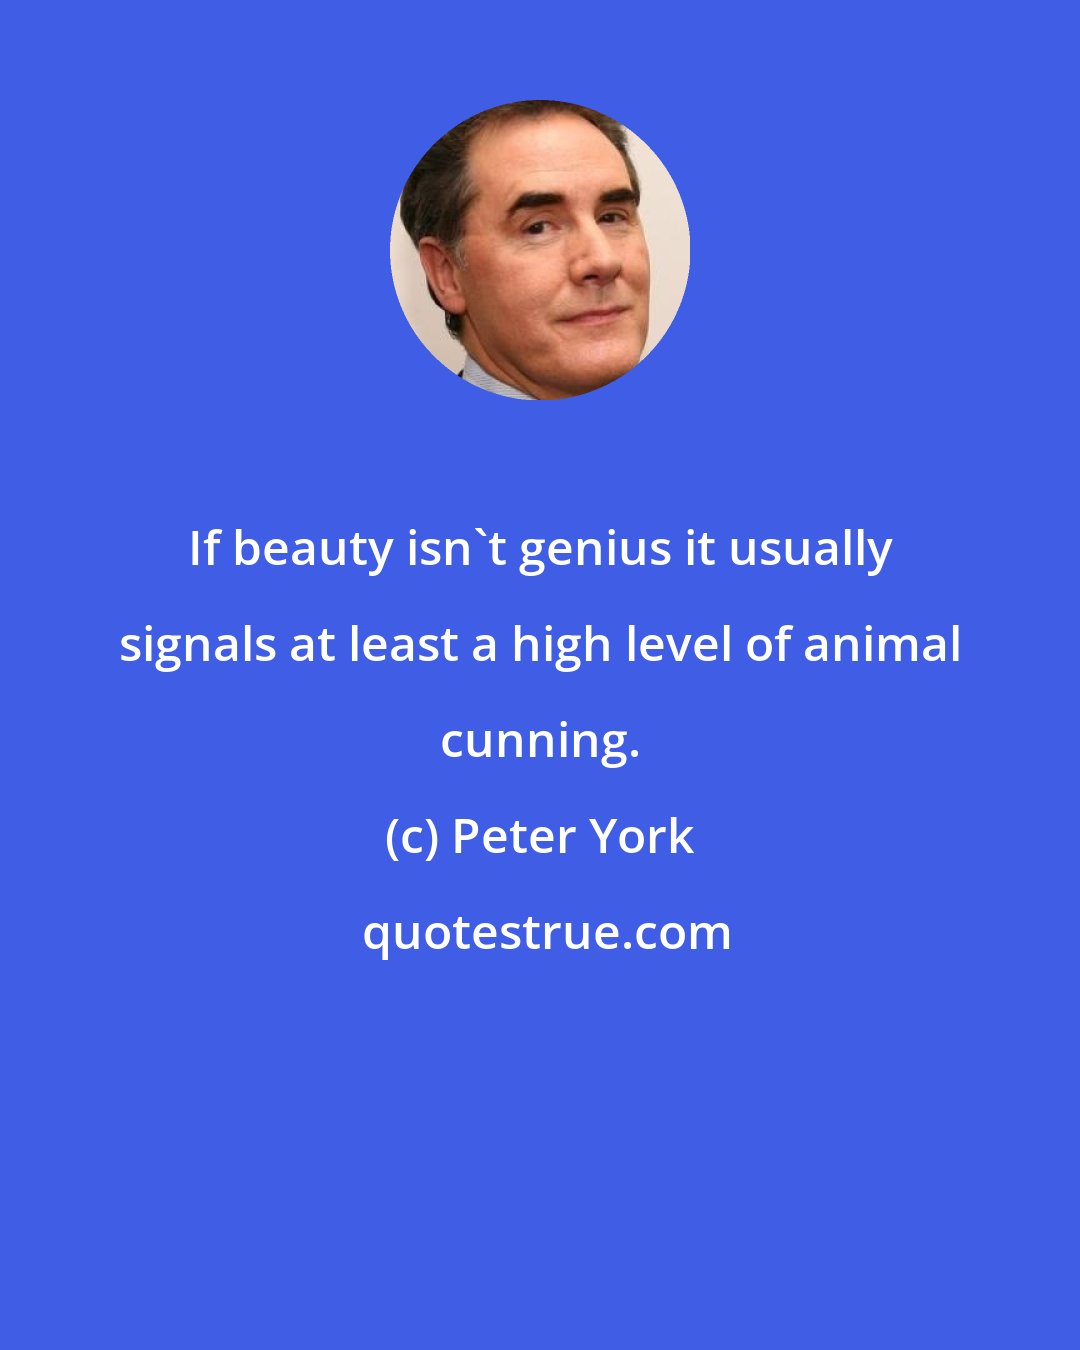 Peter York: If beauty isn't genius it usually signals at least a high level of animal cunning.